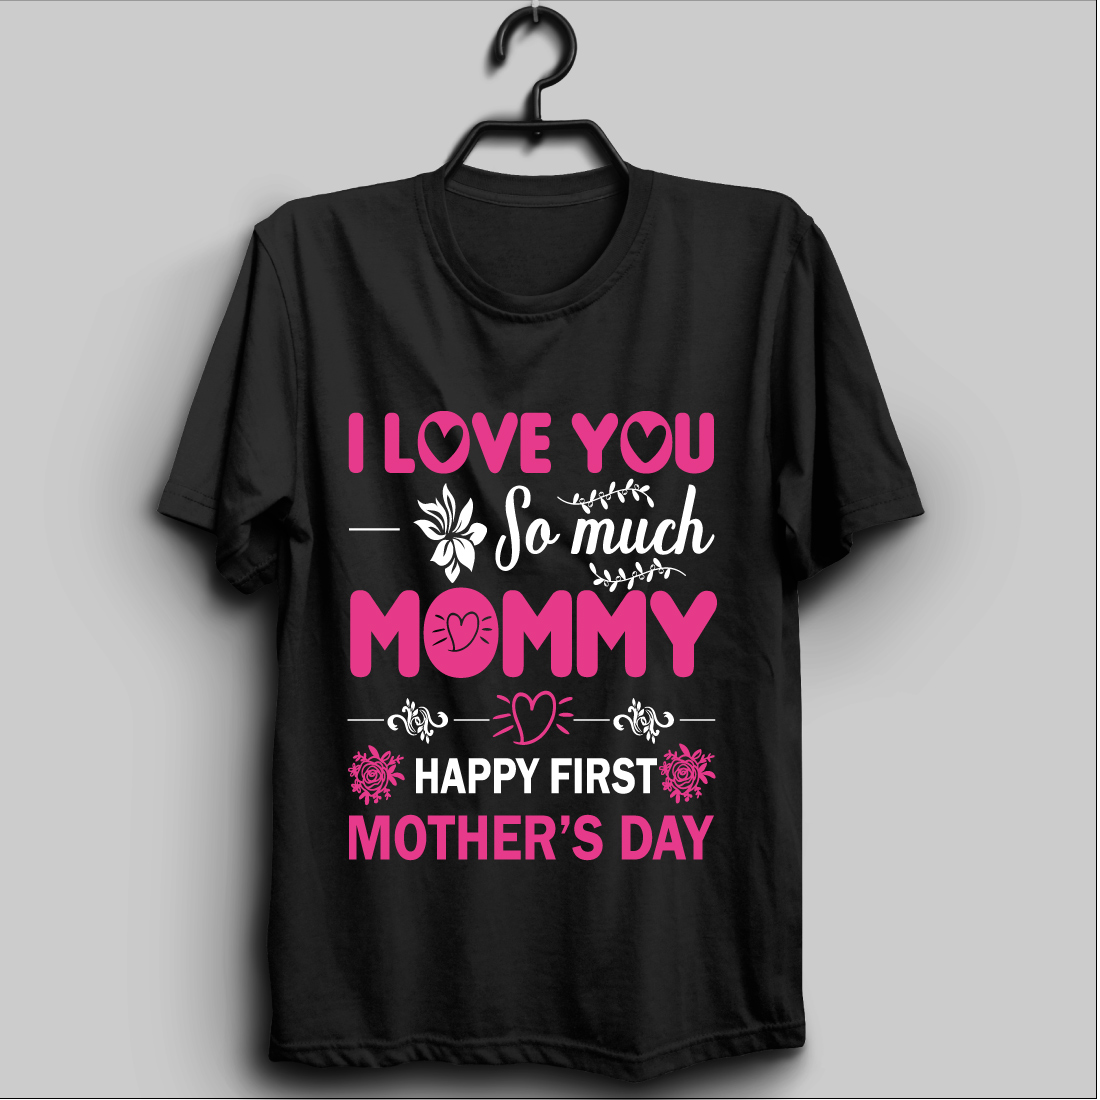 mothers day t shirt design 4 183